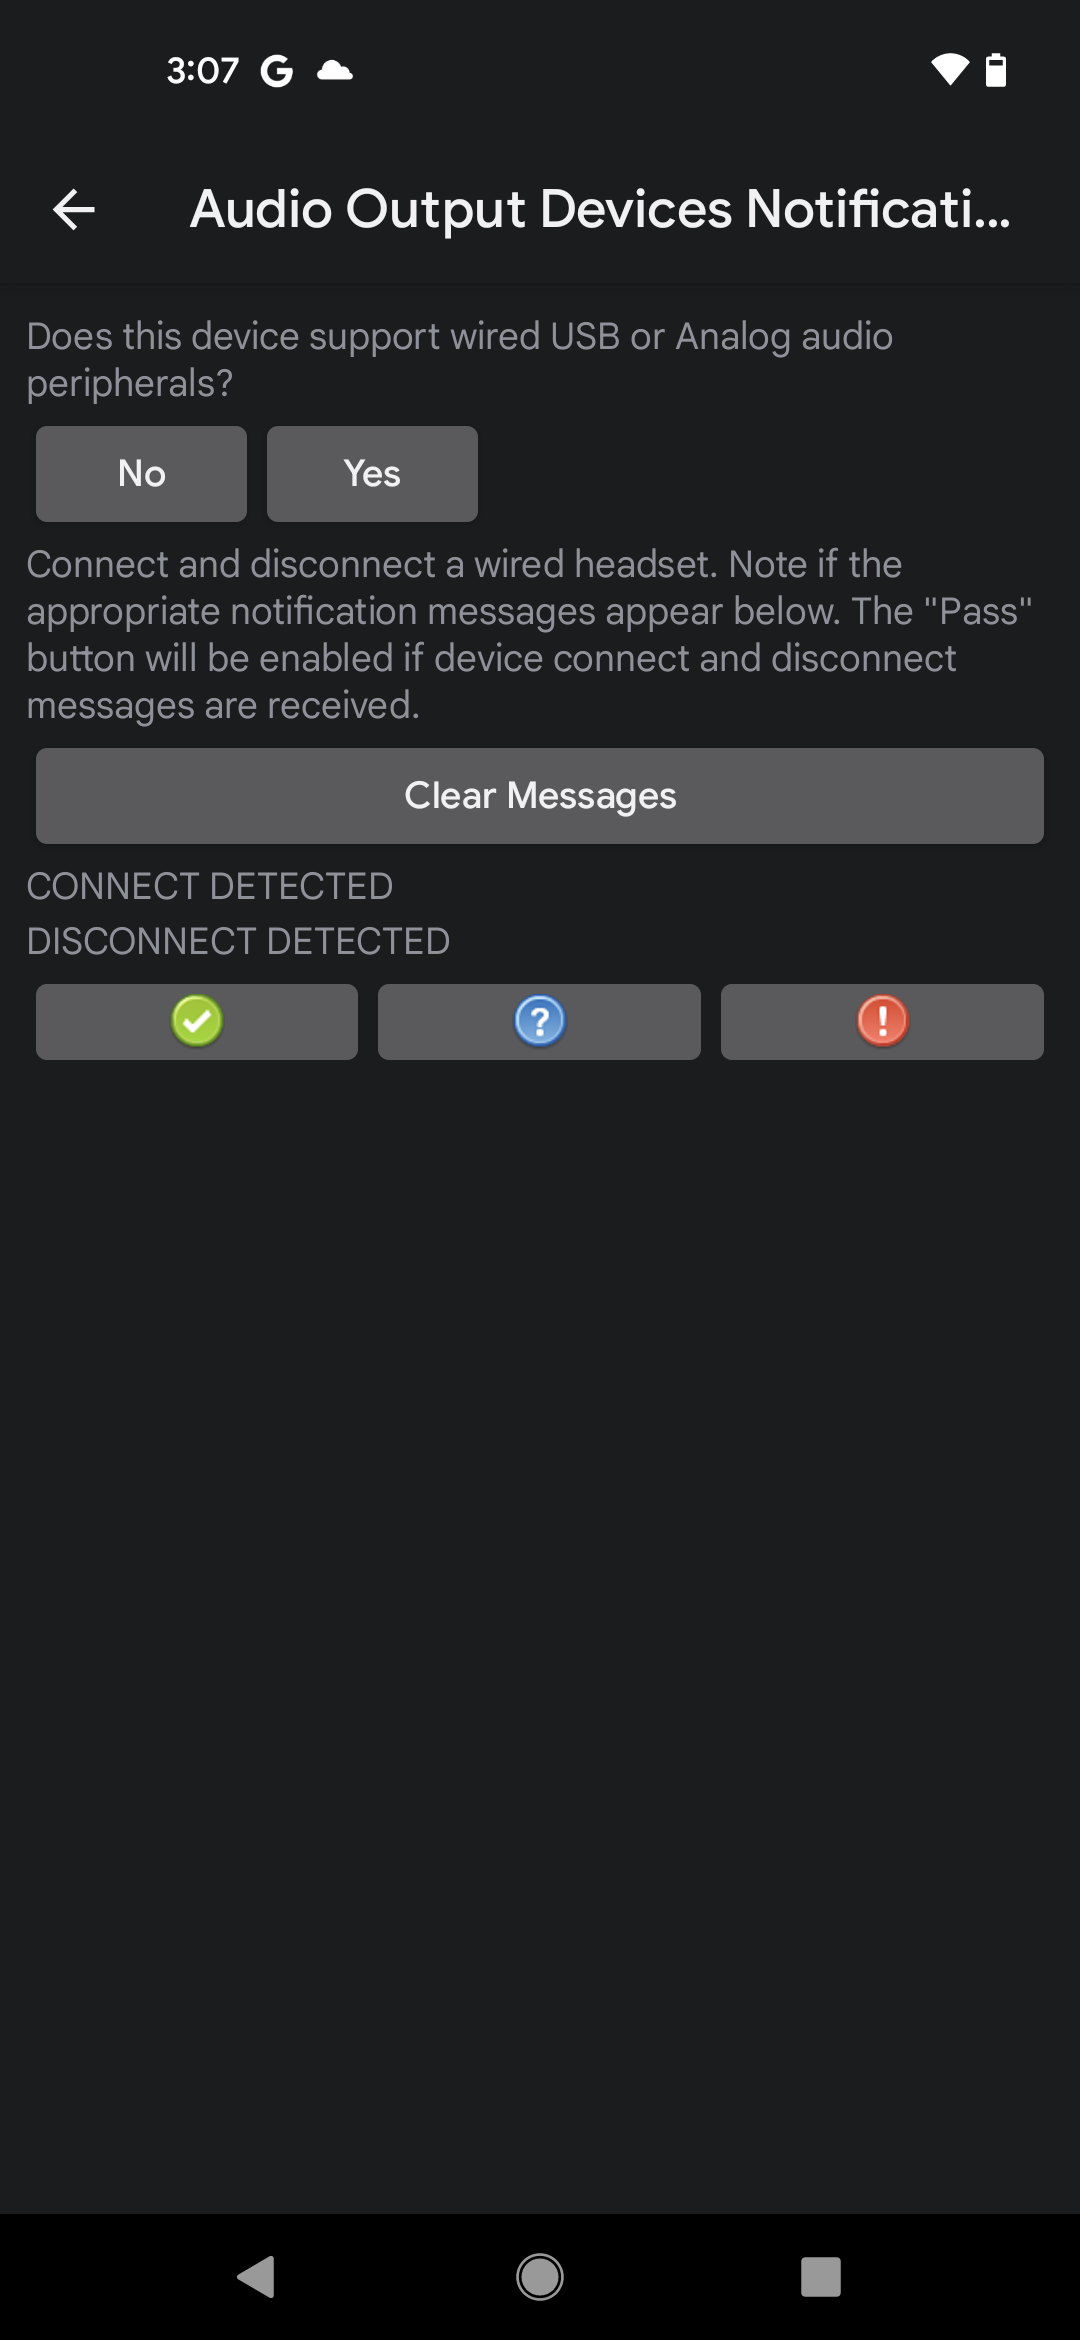 Output Devices Notifications test UI